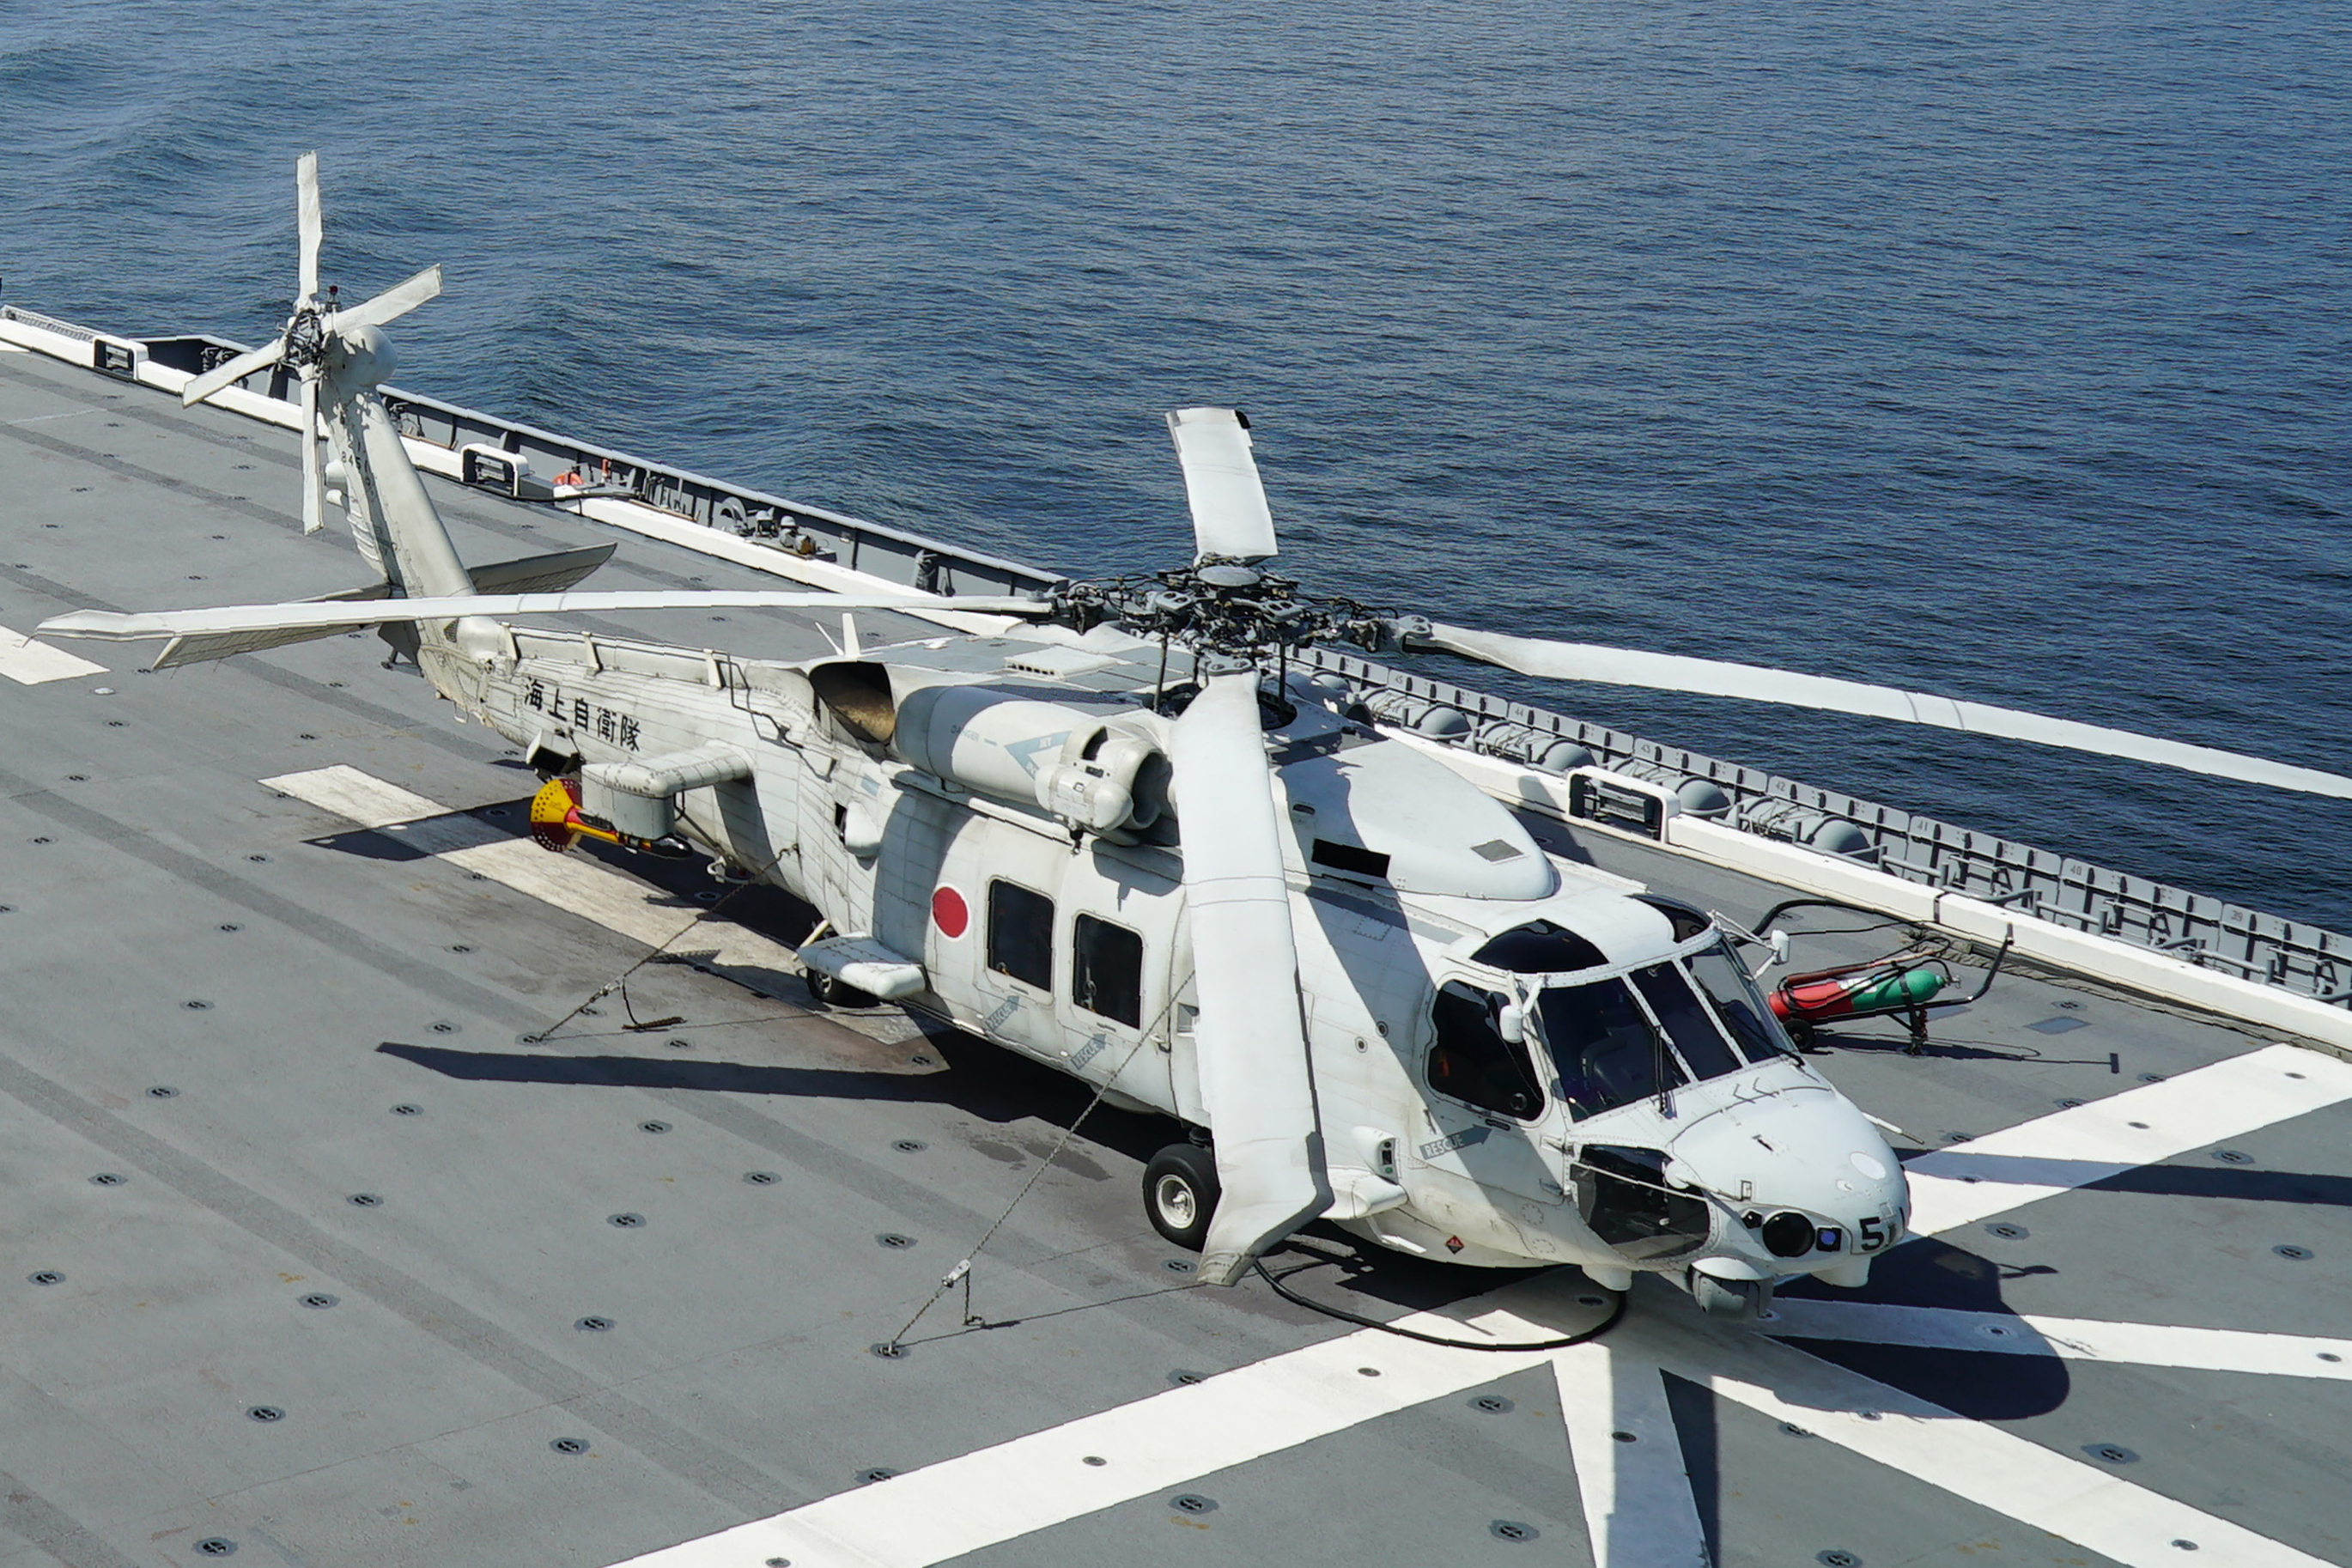 2 Japanese Navy Helicopters Crash In The Pacific Ocean: One Dead And Seven Missing